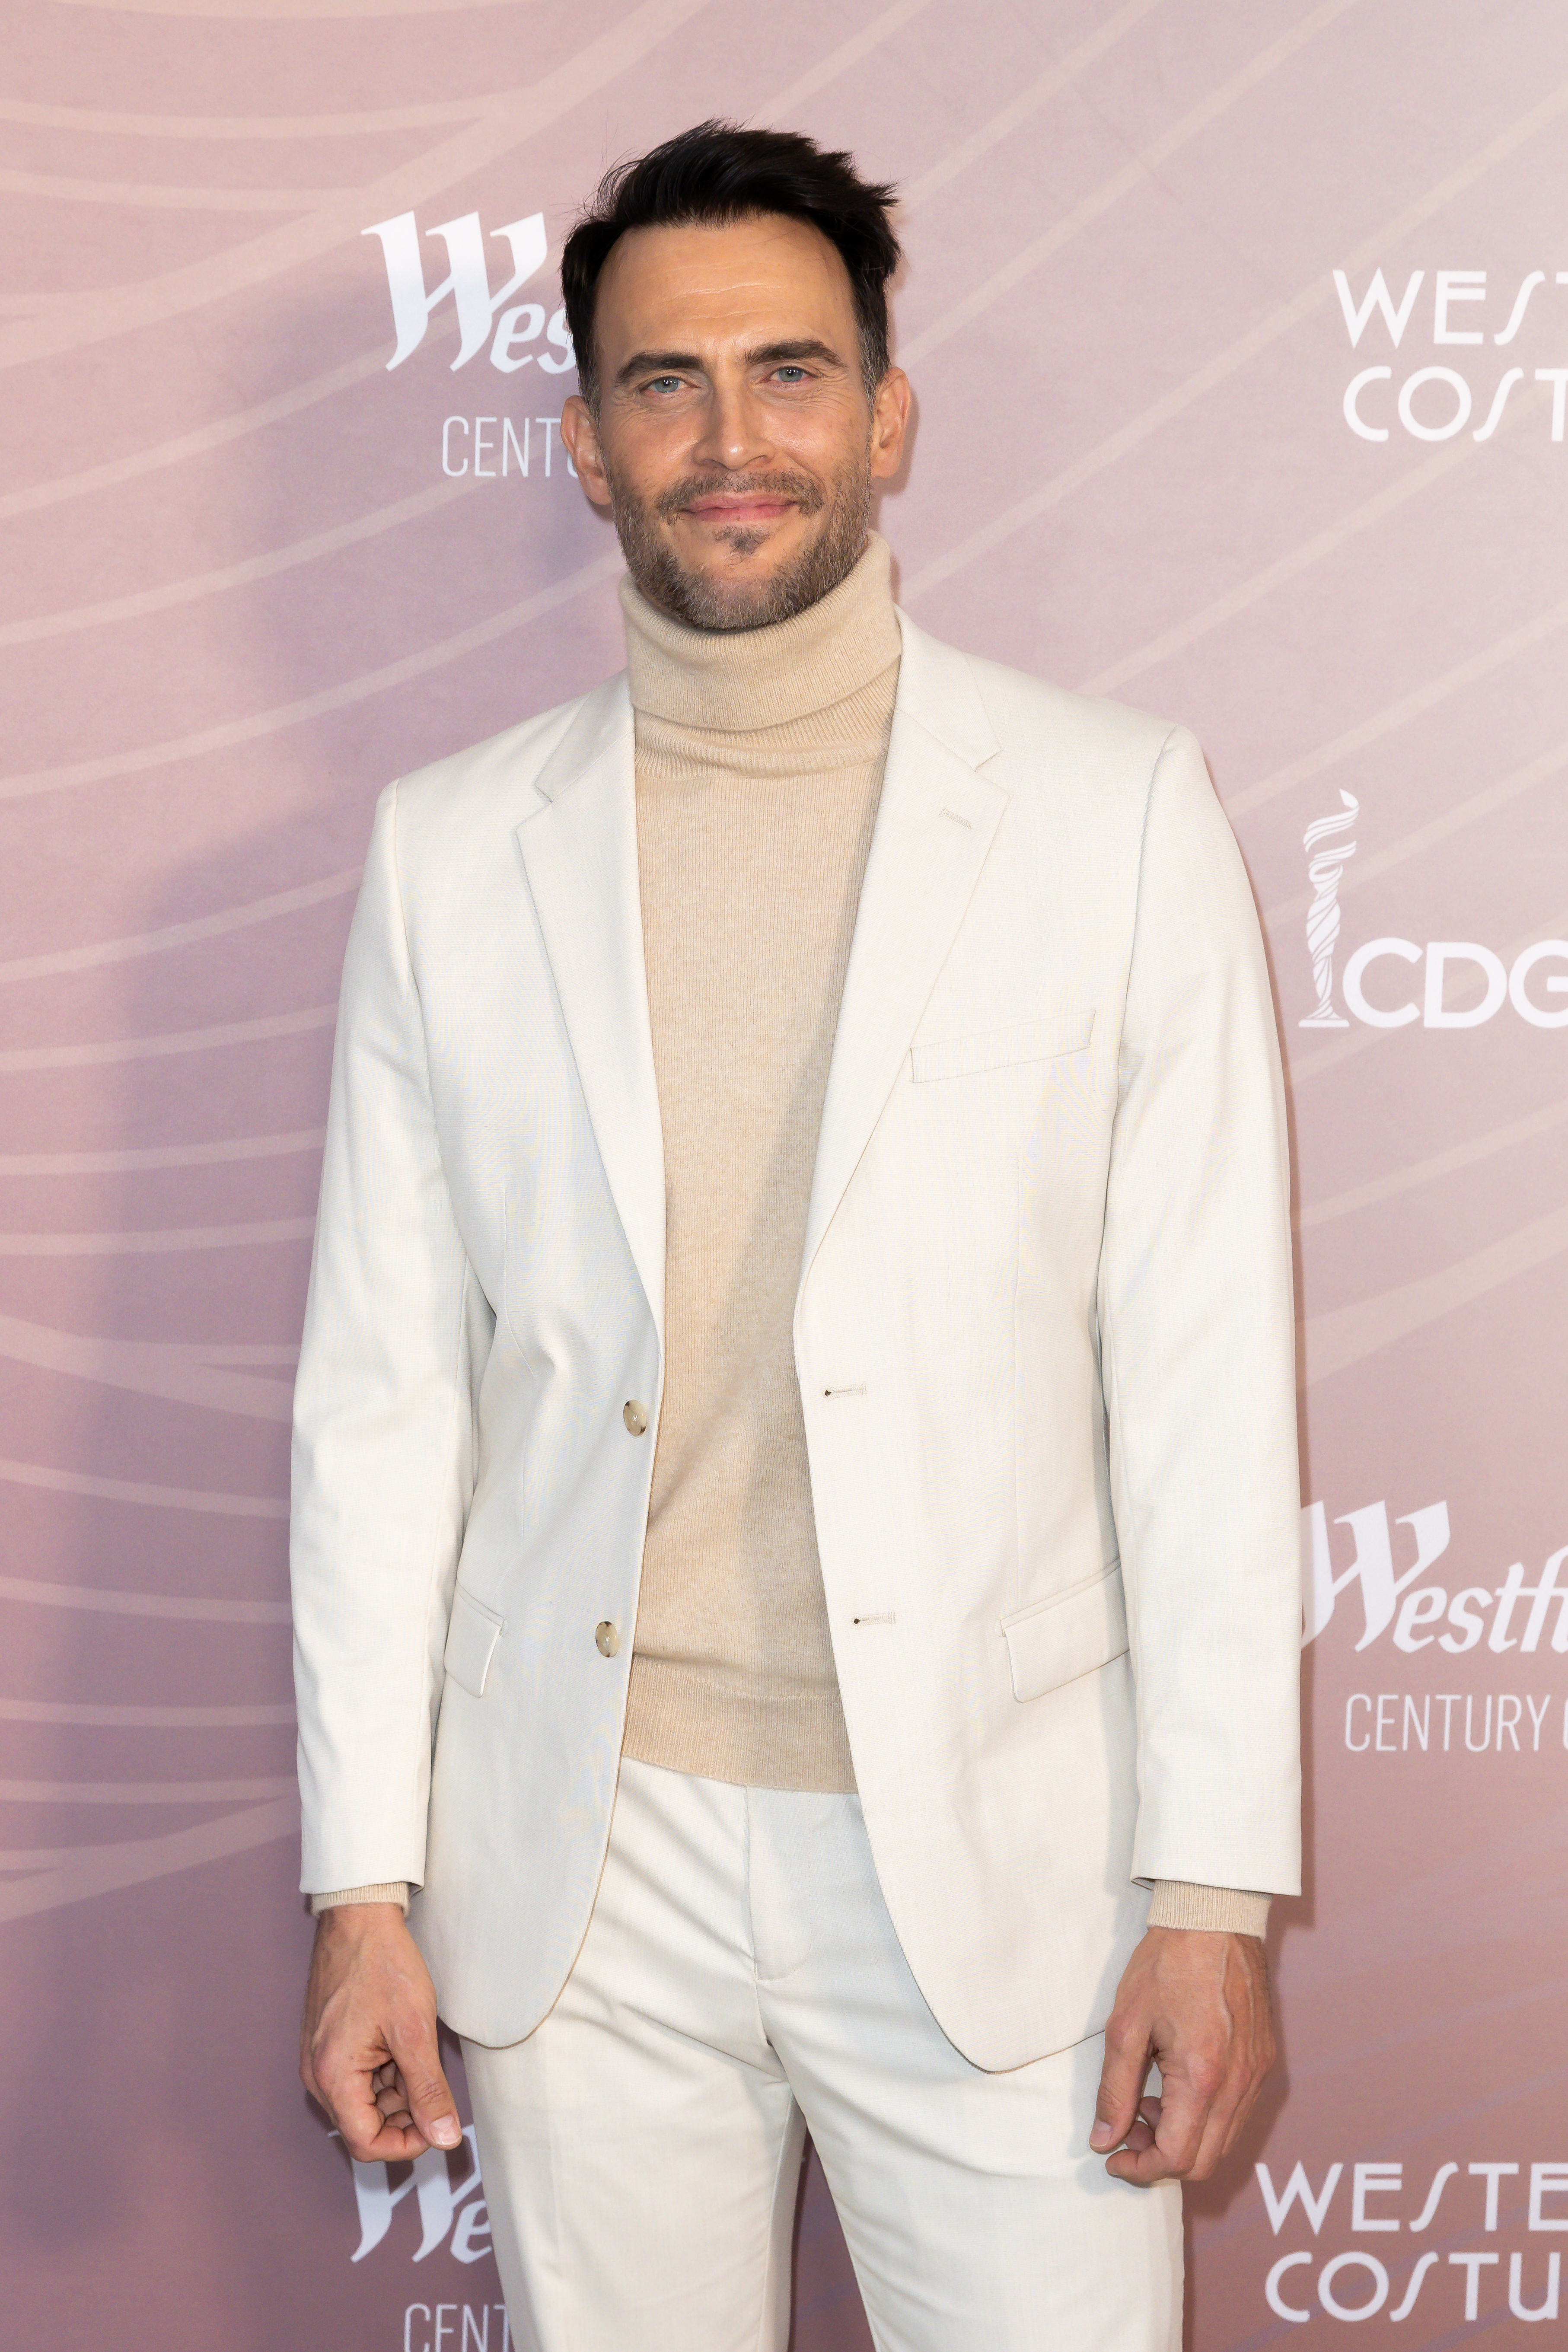 Cheyenne in a beige turtleneck and white suit at a film event